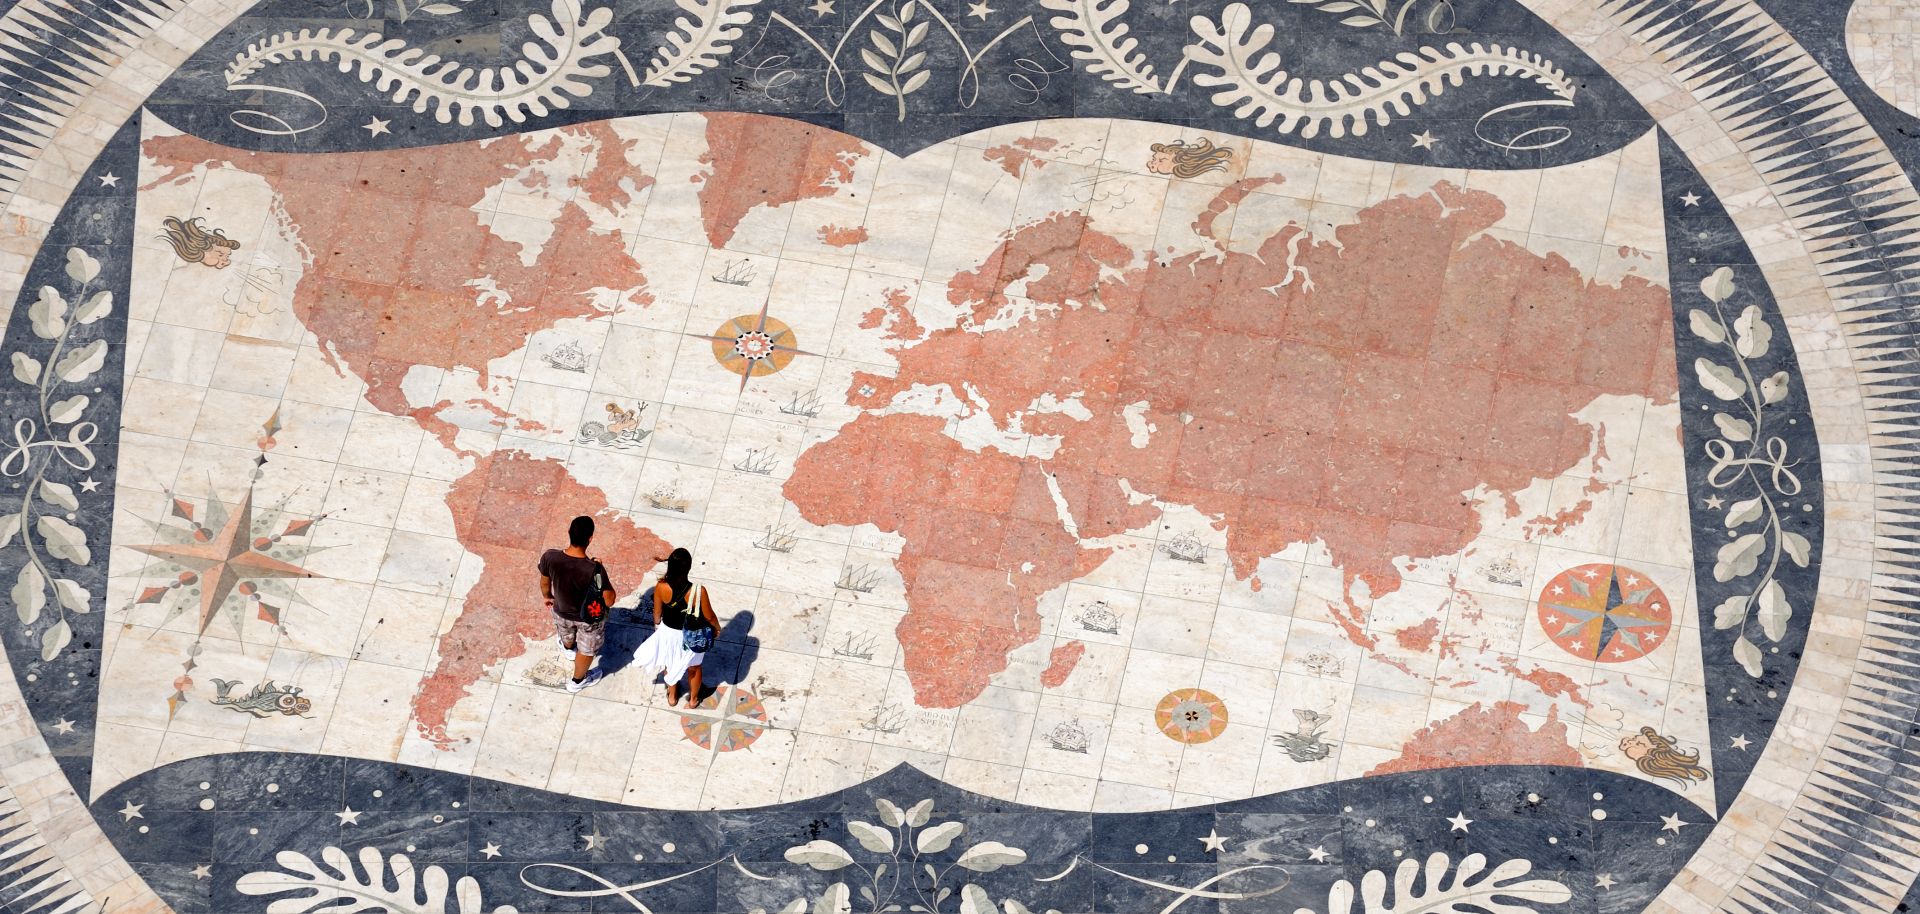 People stand over a world map at the Monument to the Discoveries in the Belem parish of Lisbon, Portugal, on Aug. 21, 2014.